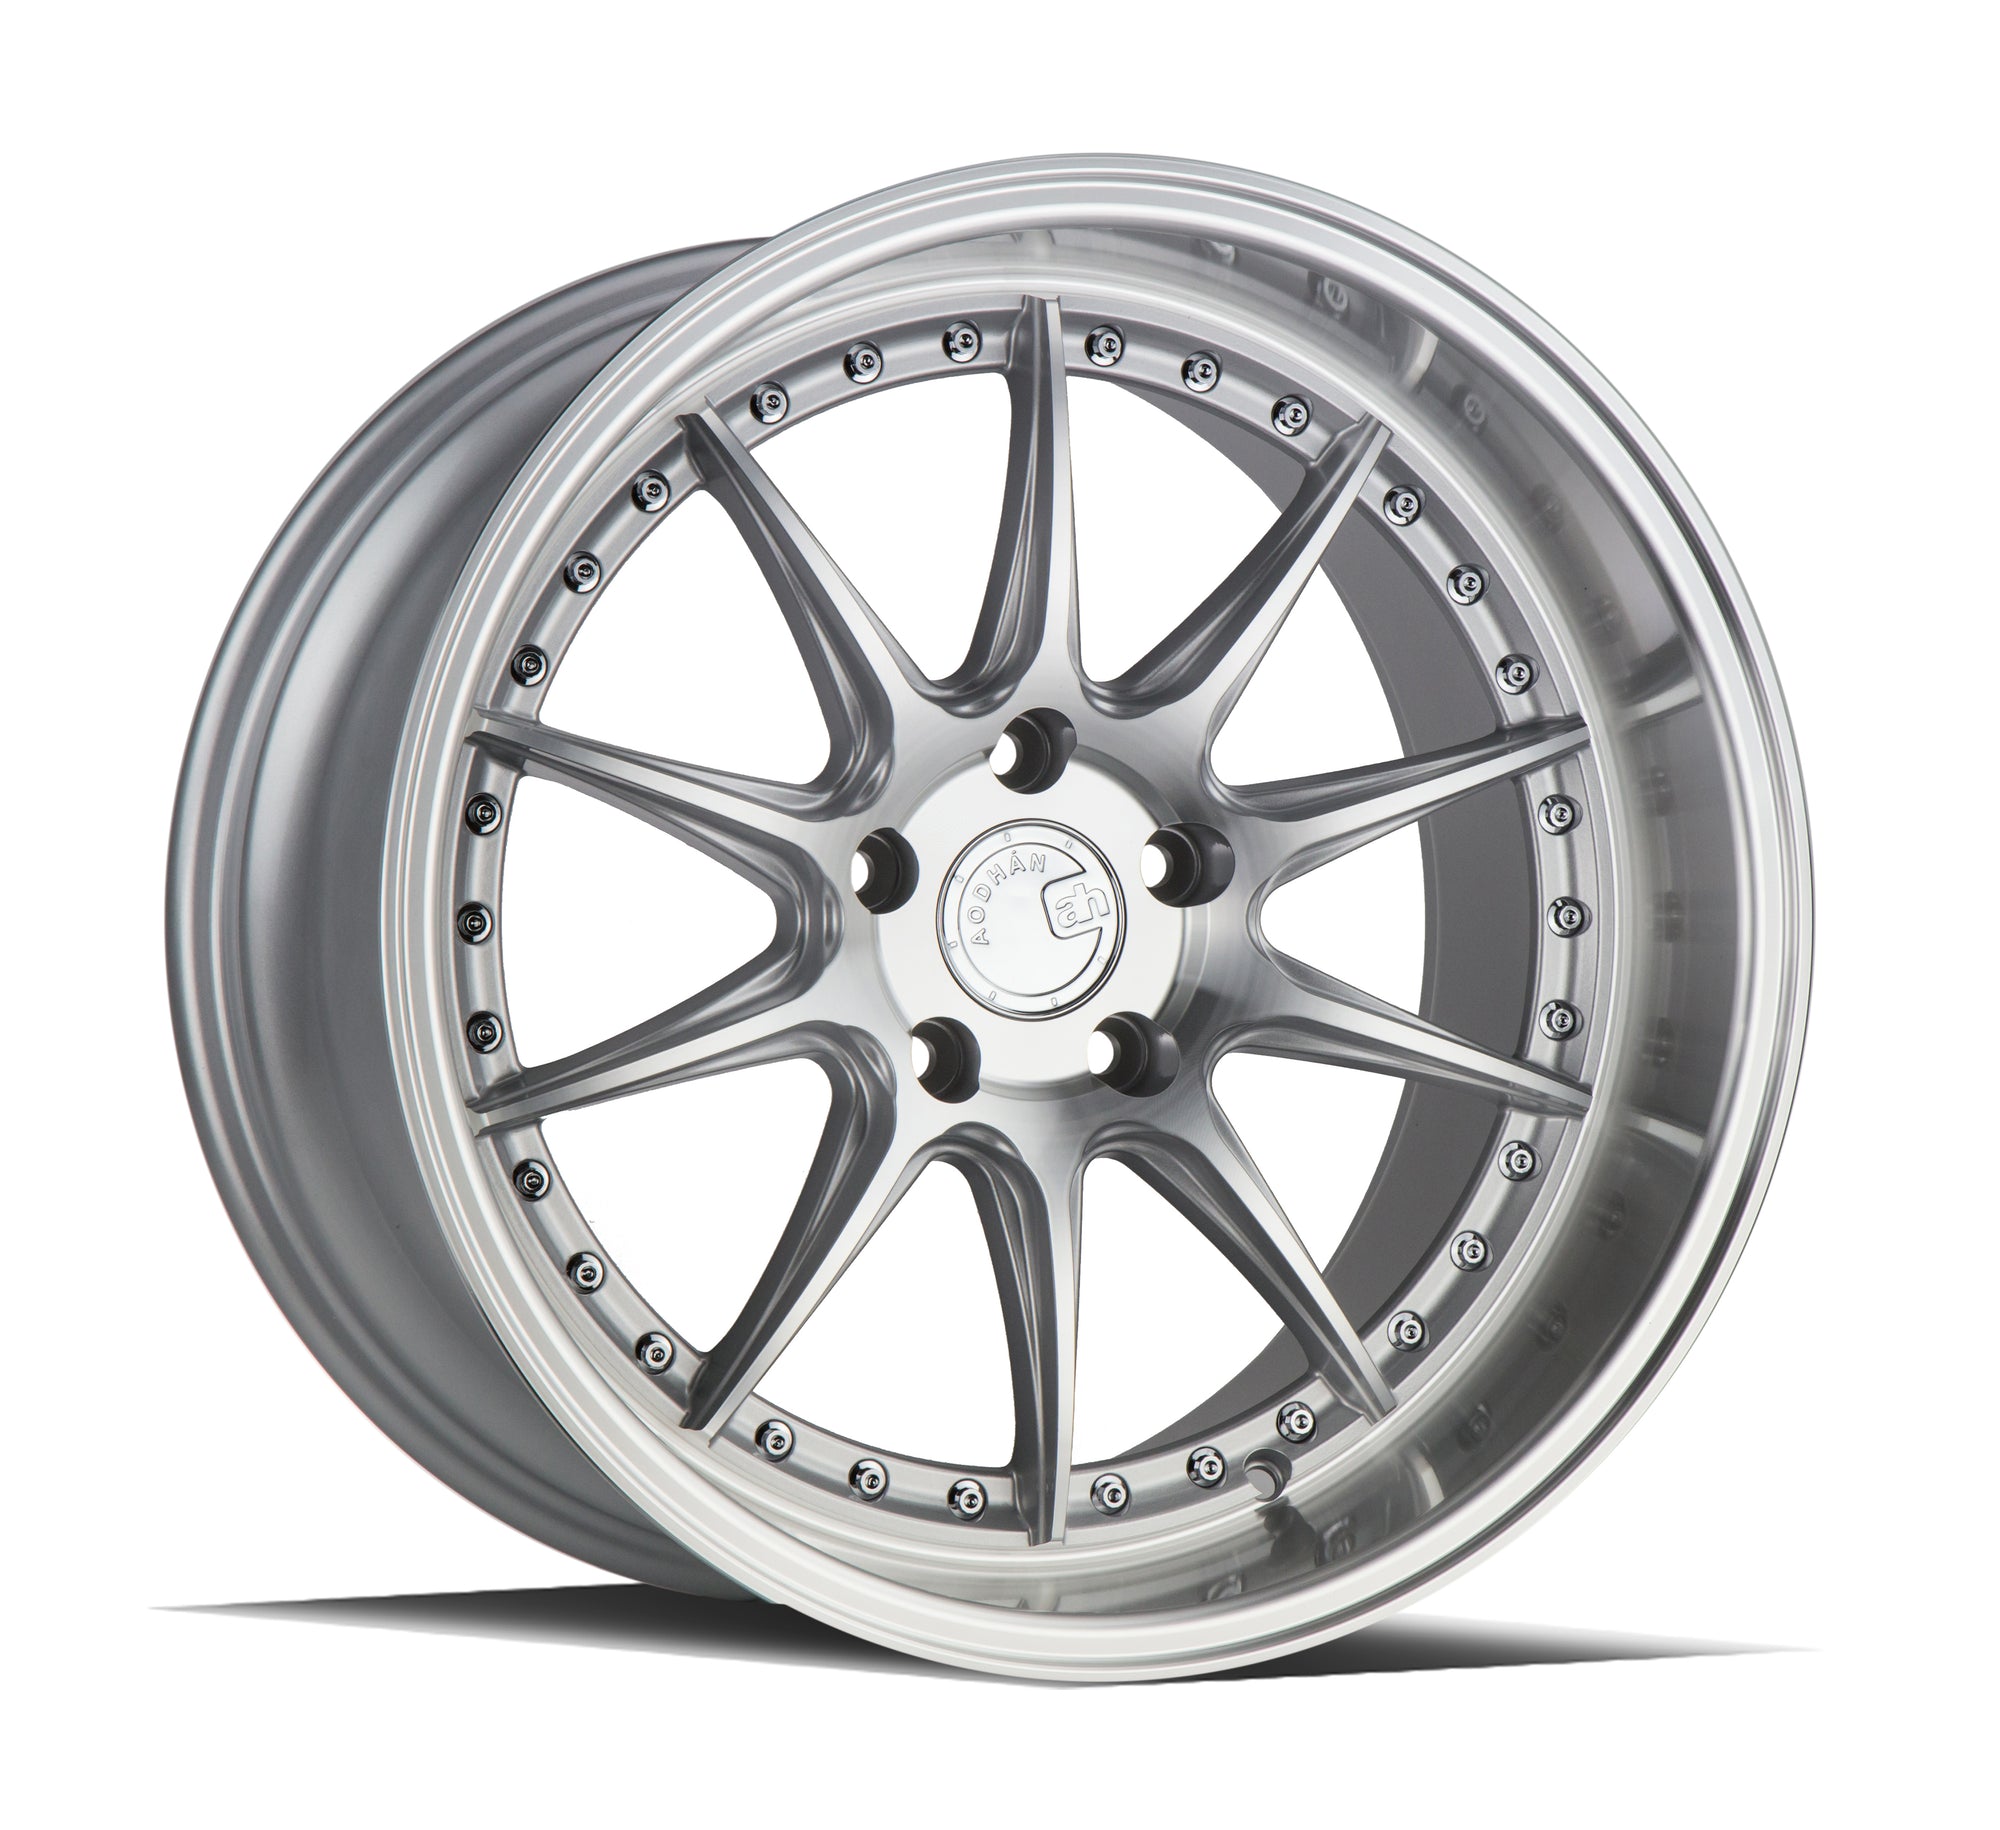 Aodhan DS07 18x10.5 5x114.3 +15 Silver w/Machined Face